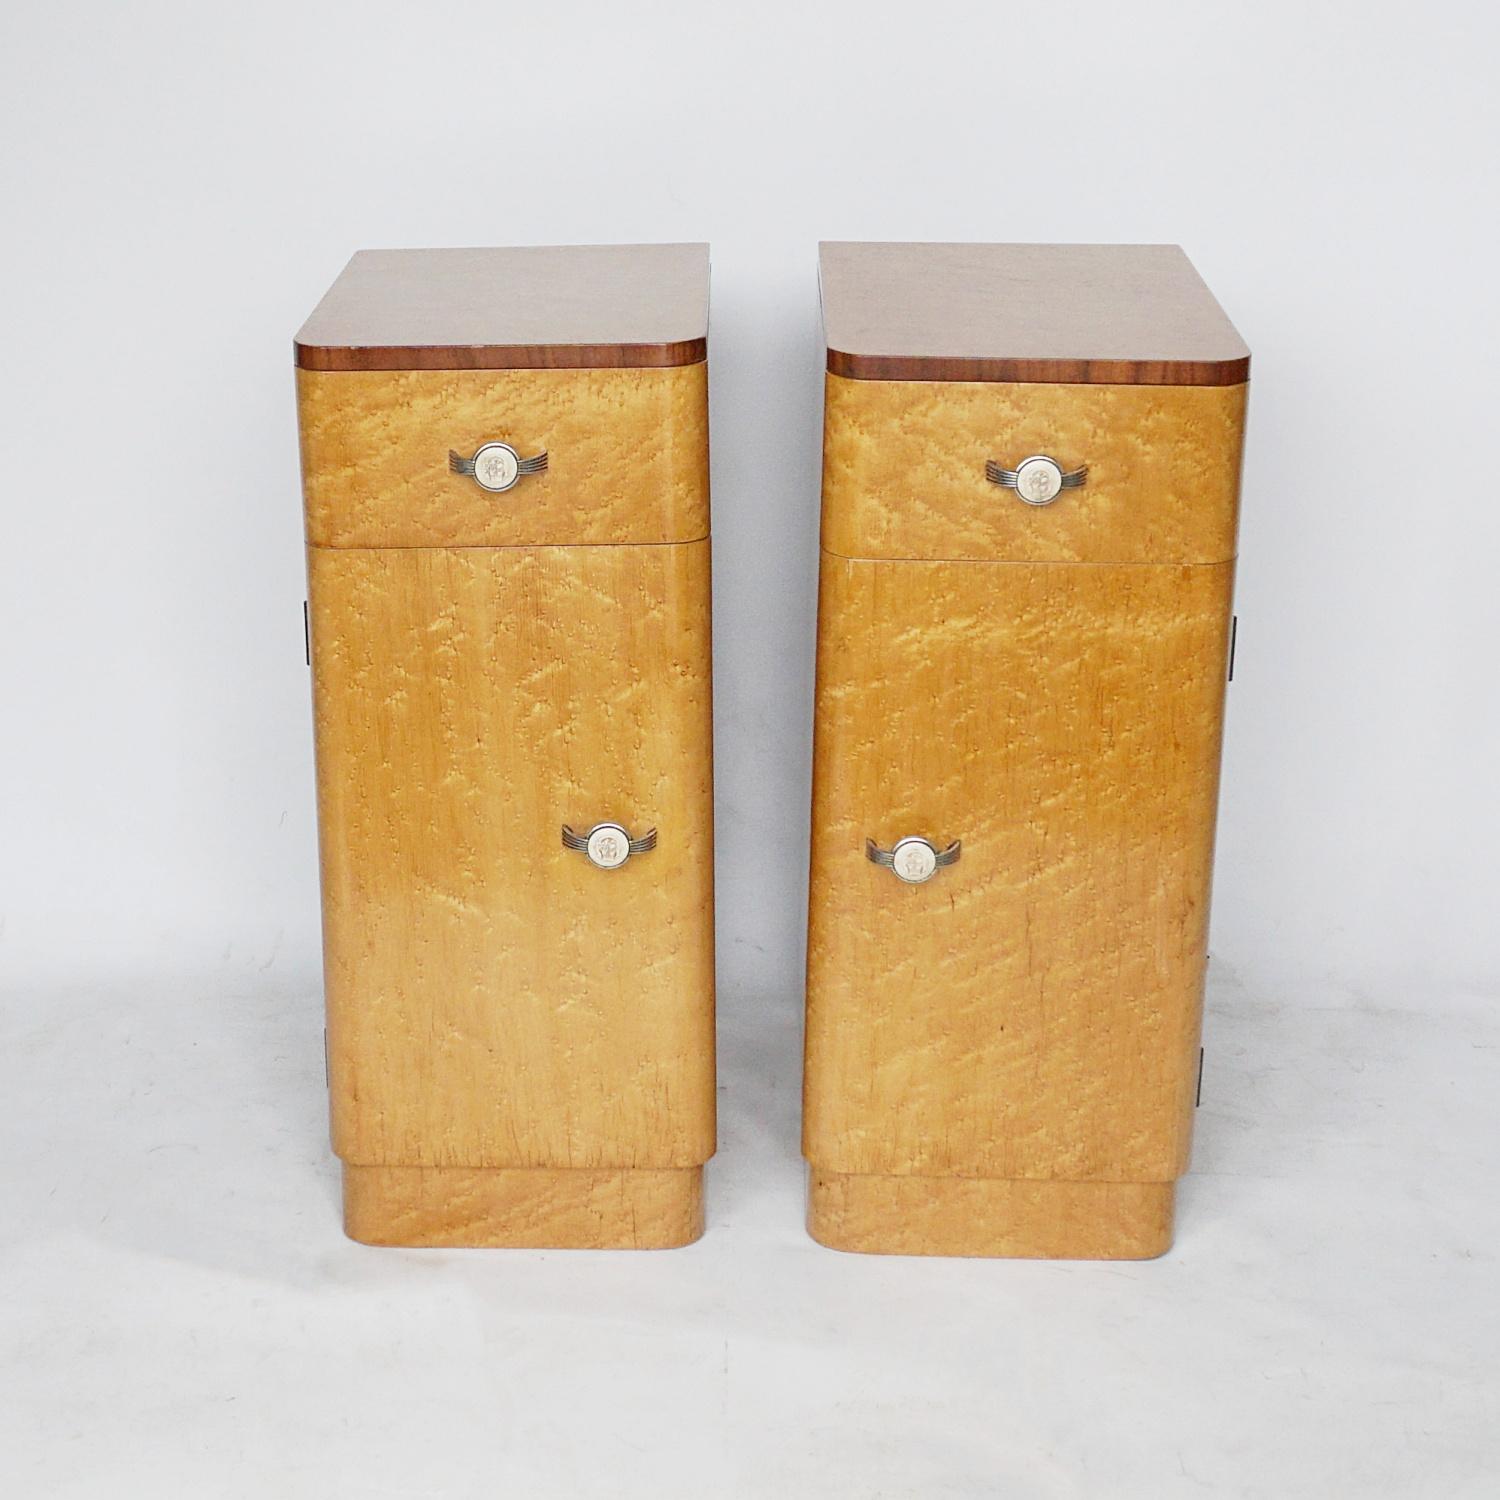 A pair of Art Deco bedside cabinets. Birdseye maple veneered with figured walnut banding. Original metal and carved bakelite handles. Upper drawer with lower shelved cupboard compartment. 

Dimensions: H 73.5cm W 37cm D 44cm

Origin: